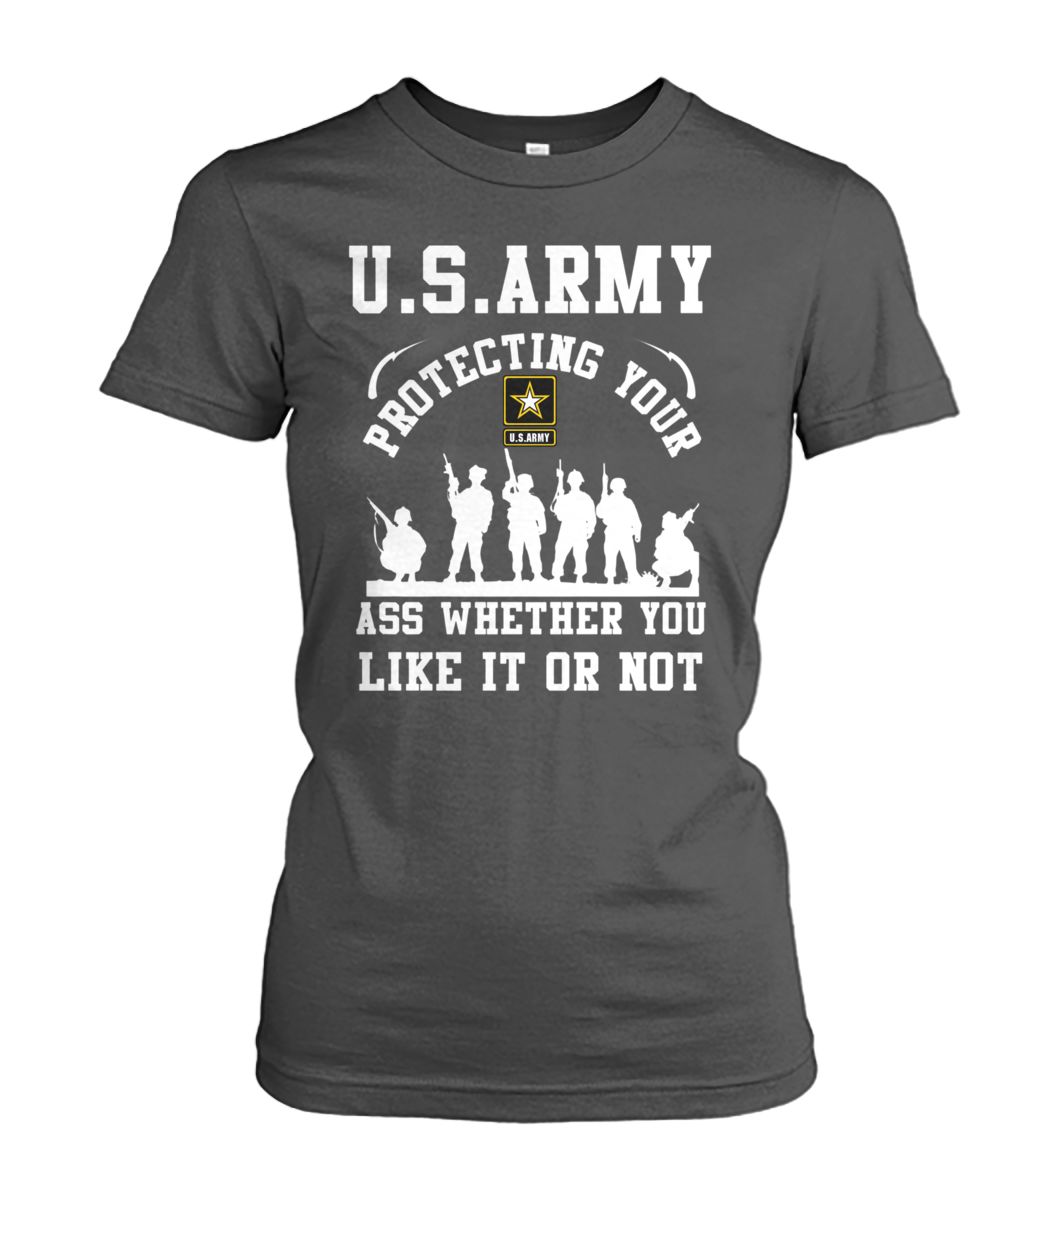 U.S.Army protecting your ass whether you like it or not women's crew tee